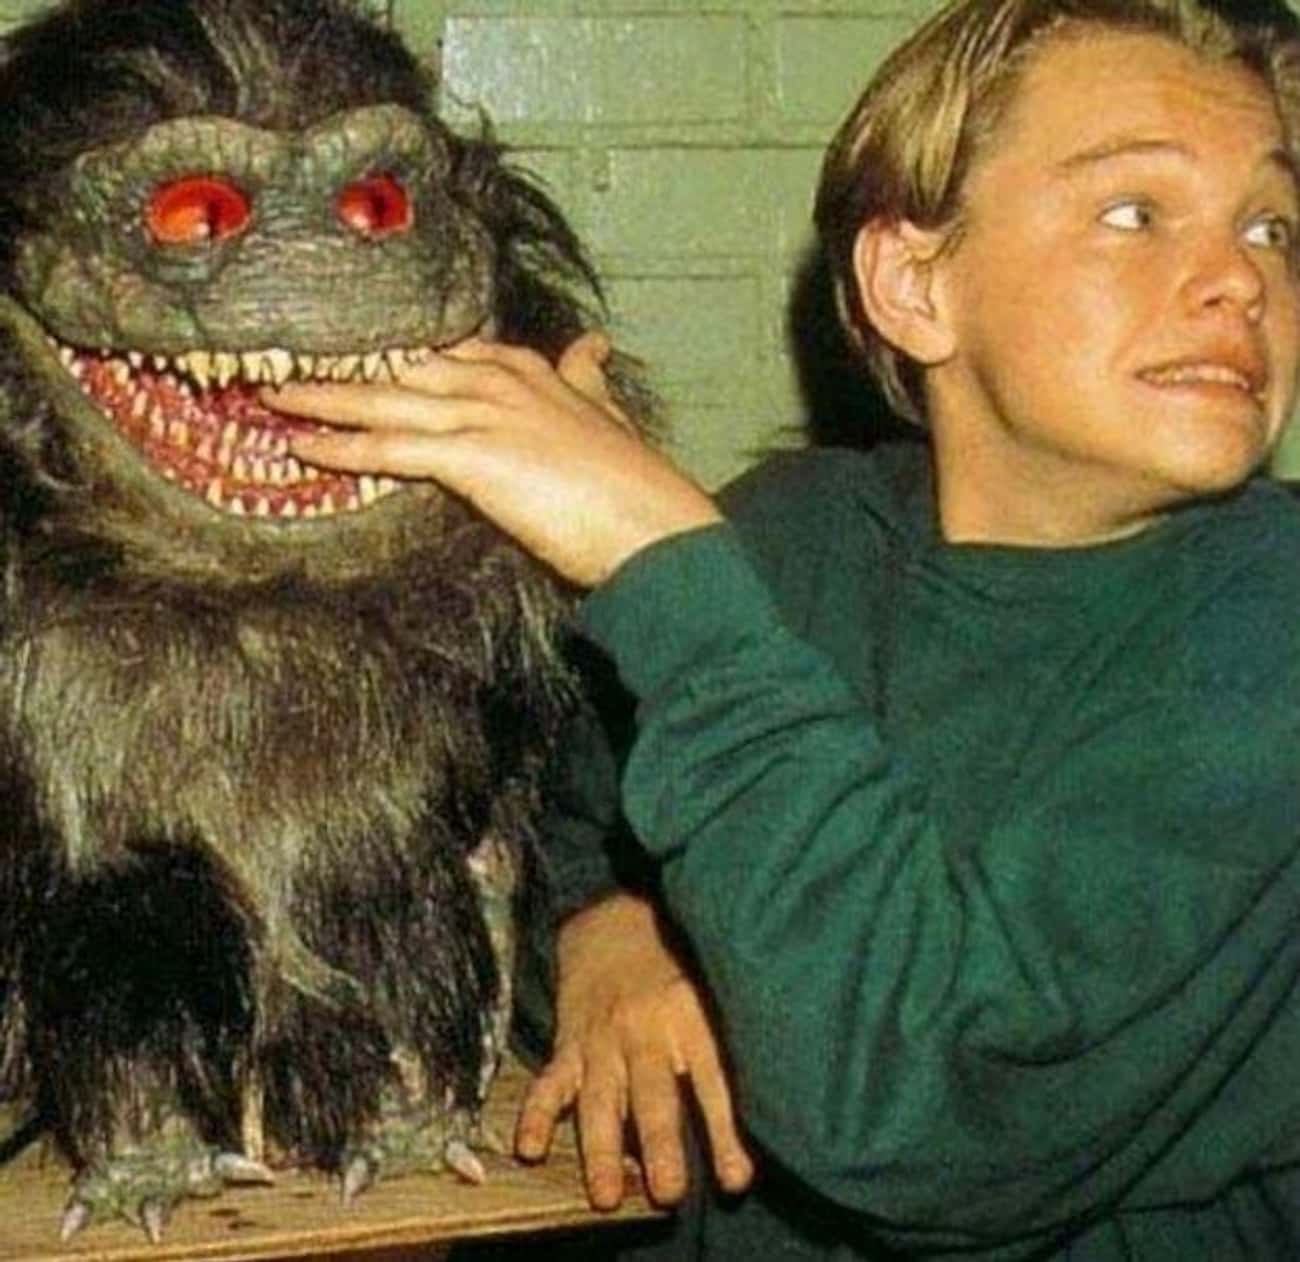 Leonardo Dicaprio Is a Rich Brat Who Almost Gets Eaten by Monsters in Critters 3